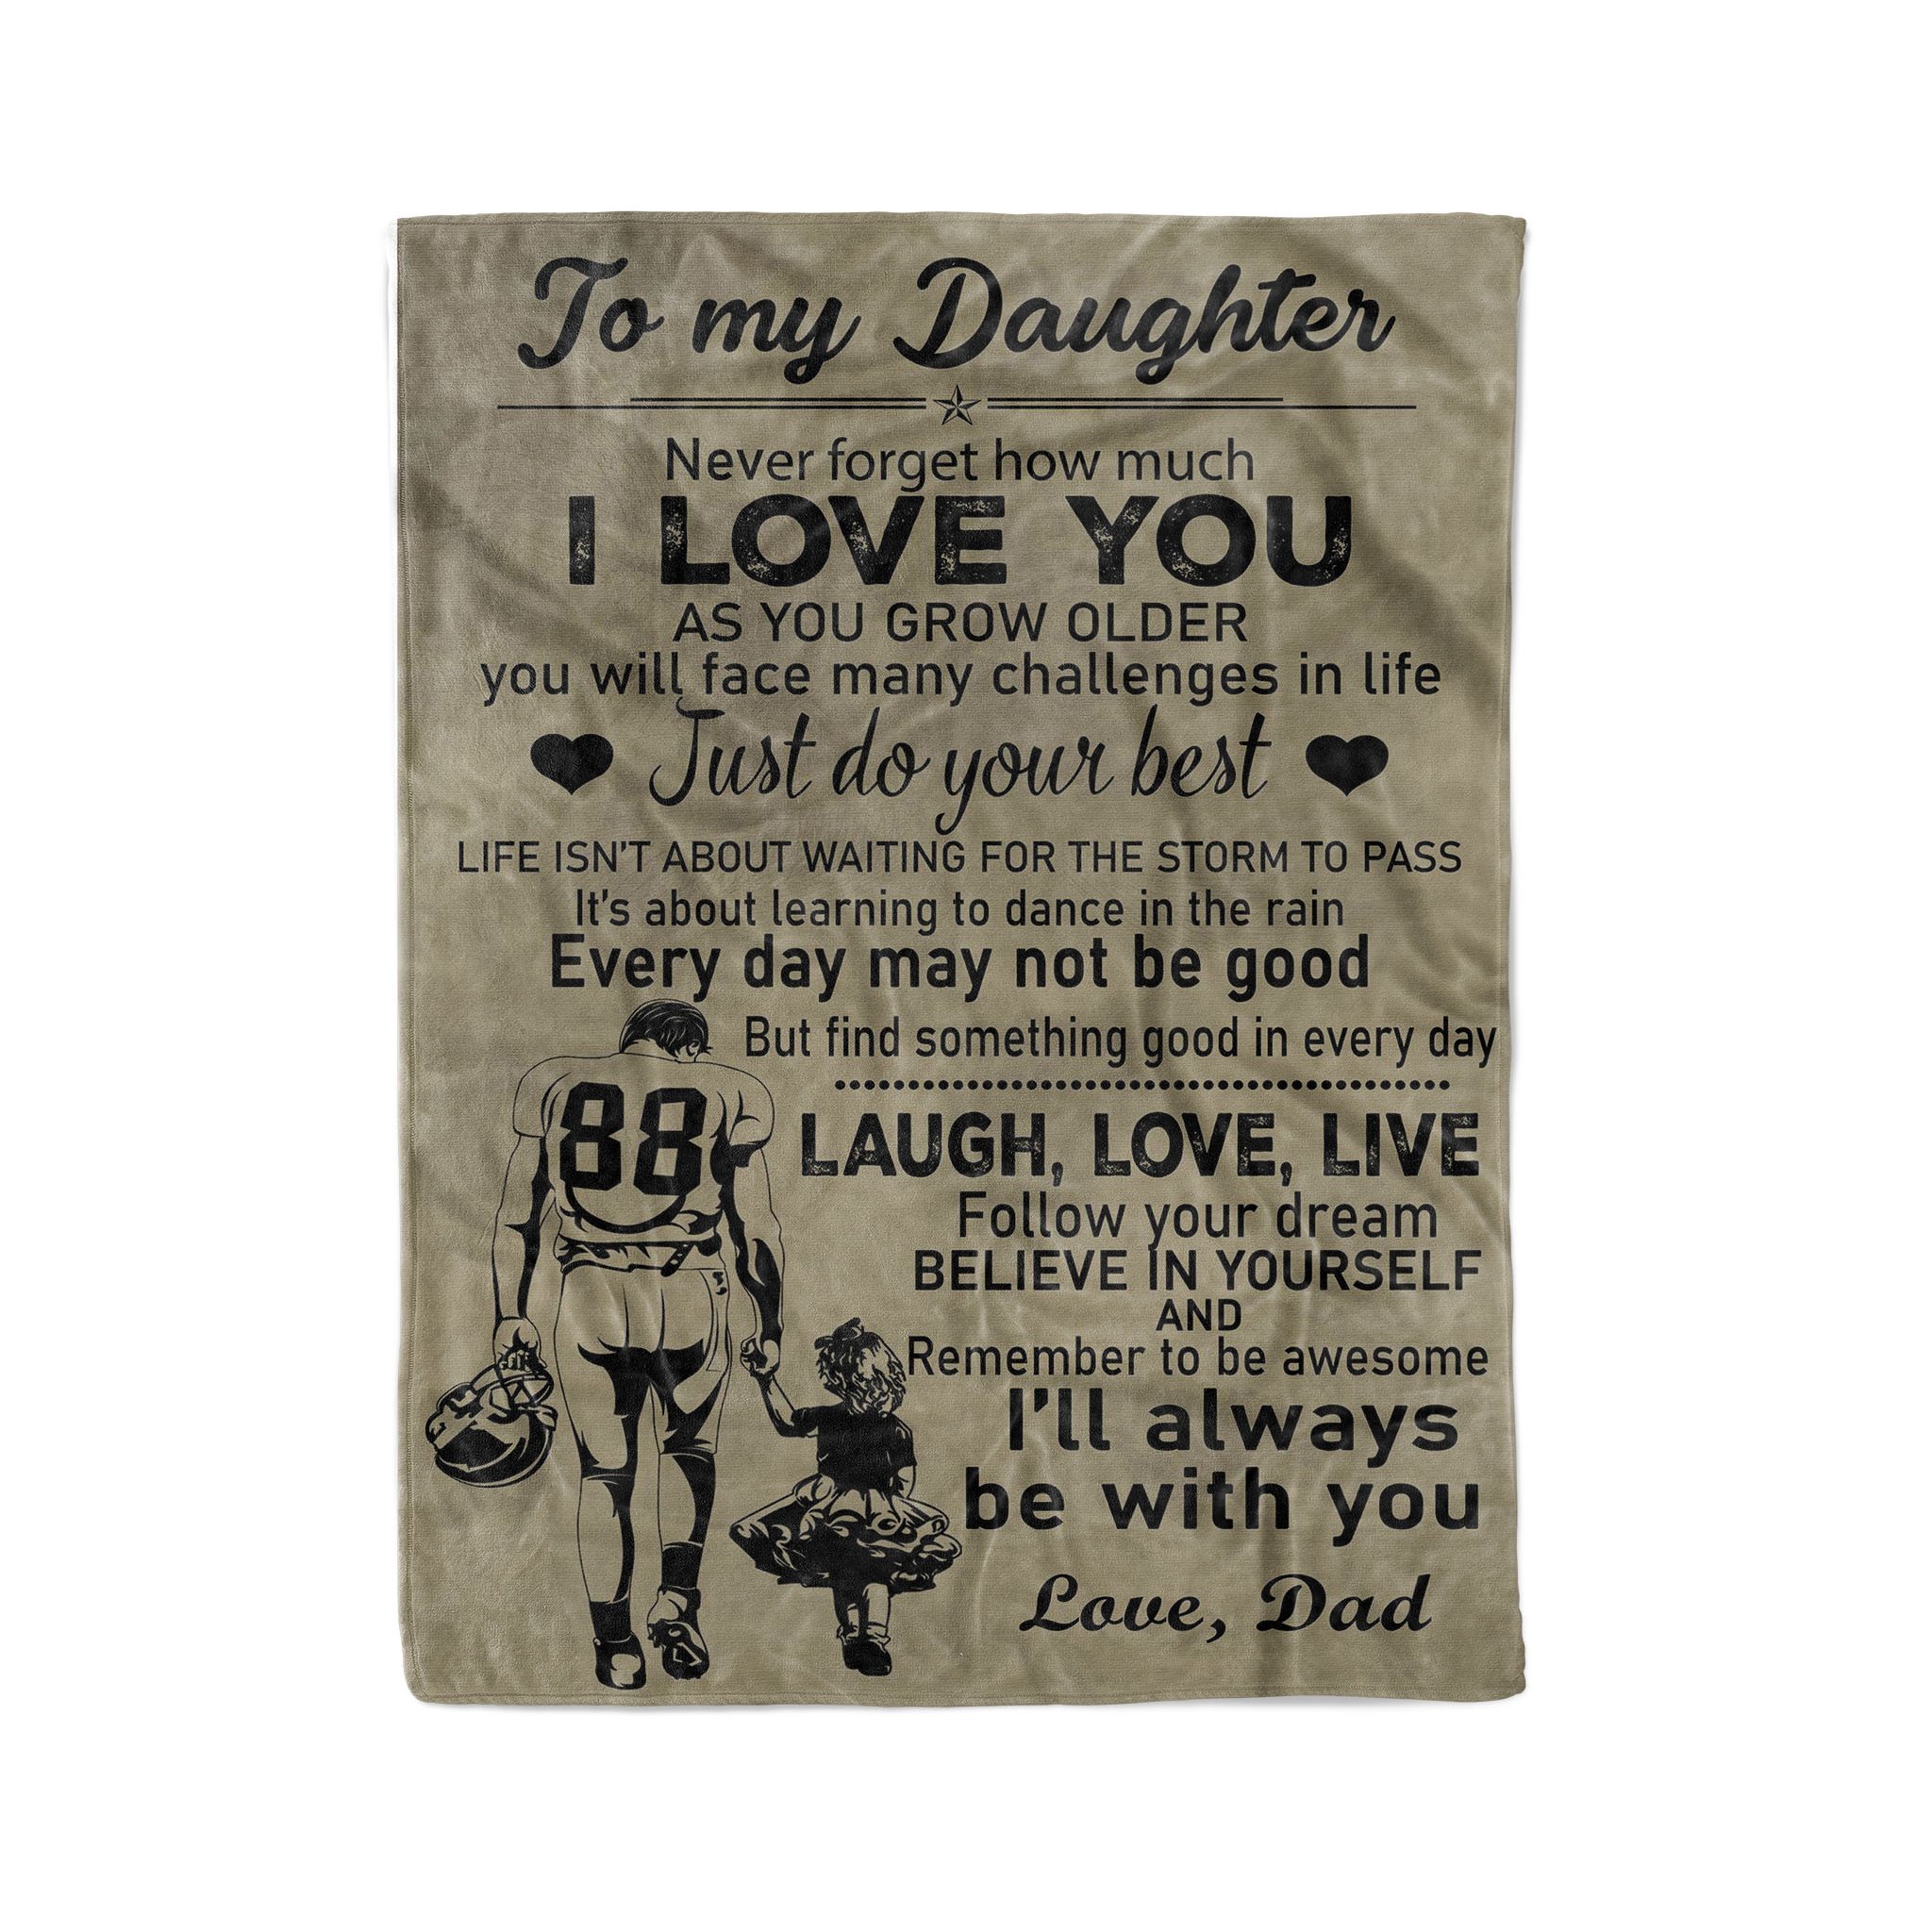 Fleece American football Blanket dad to daughter never forget how much I love you